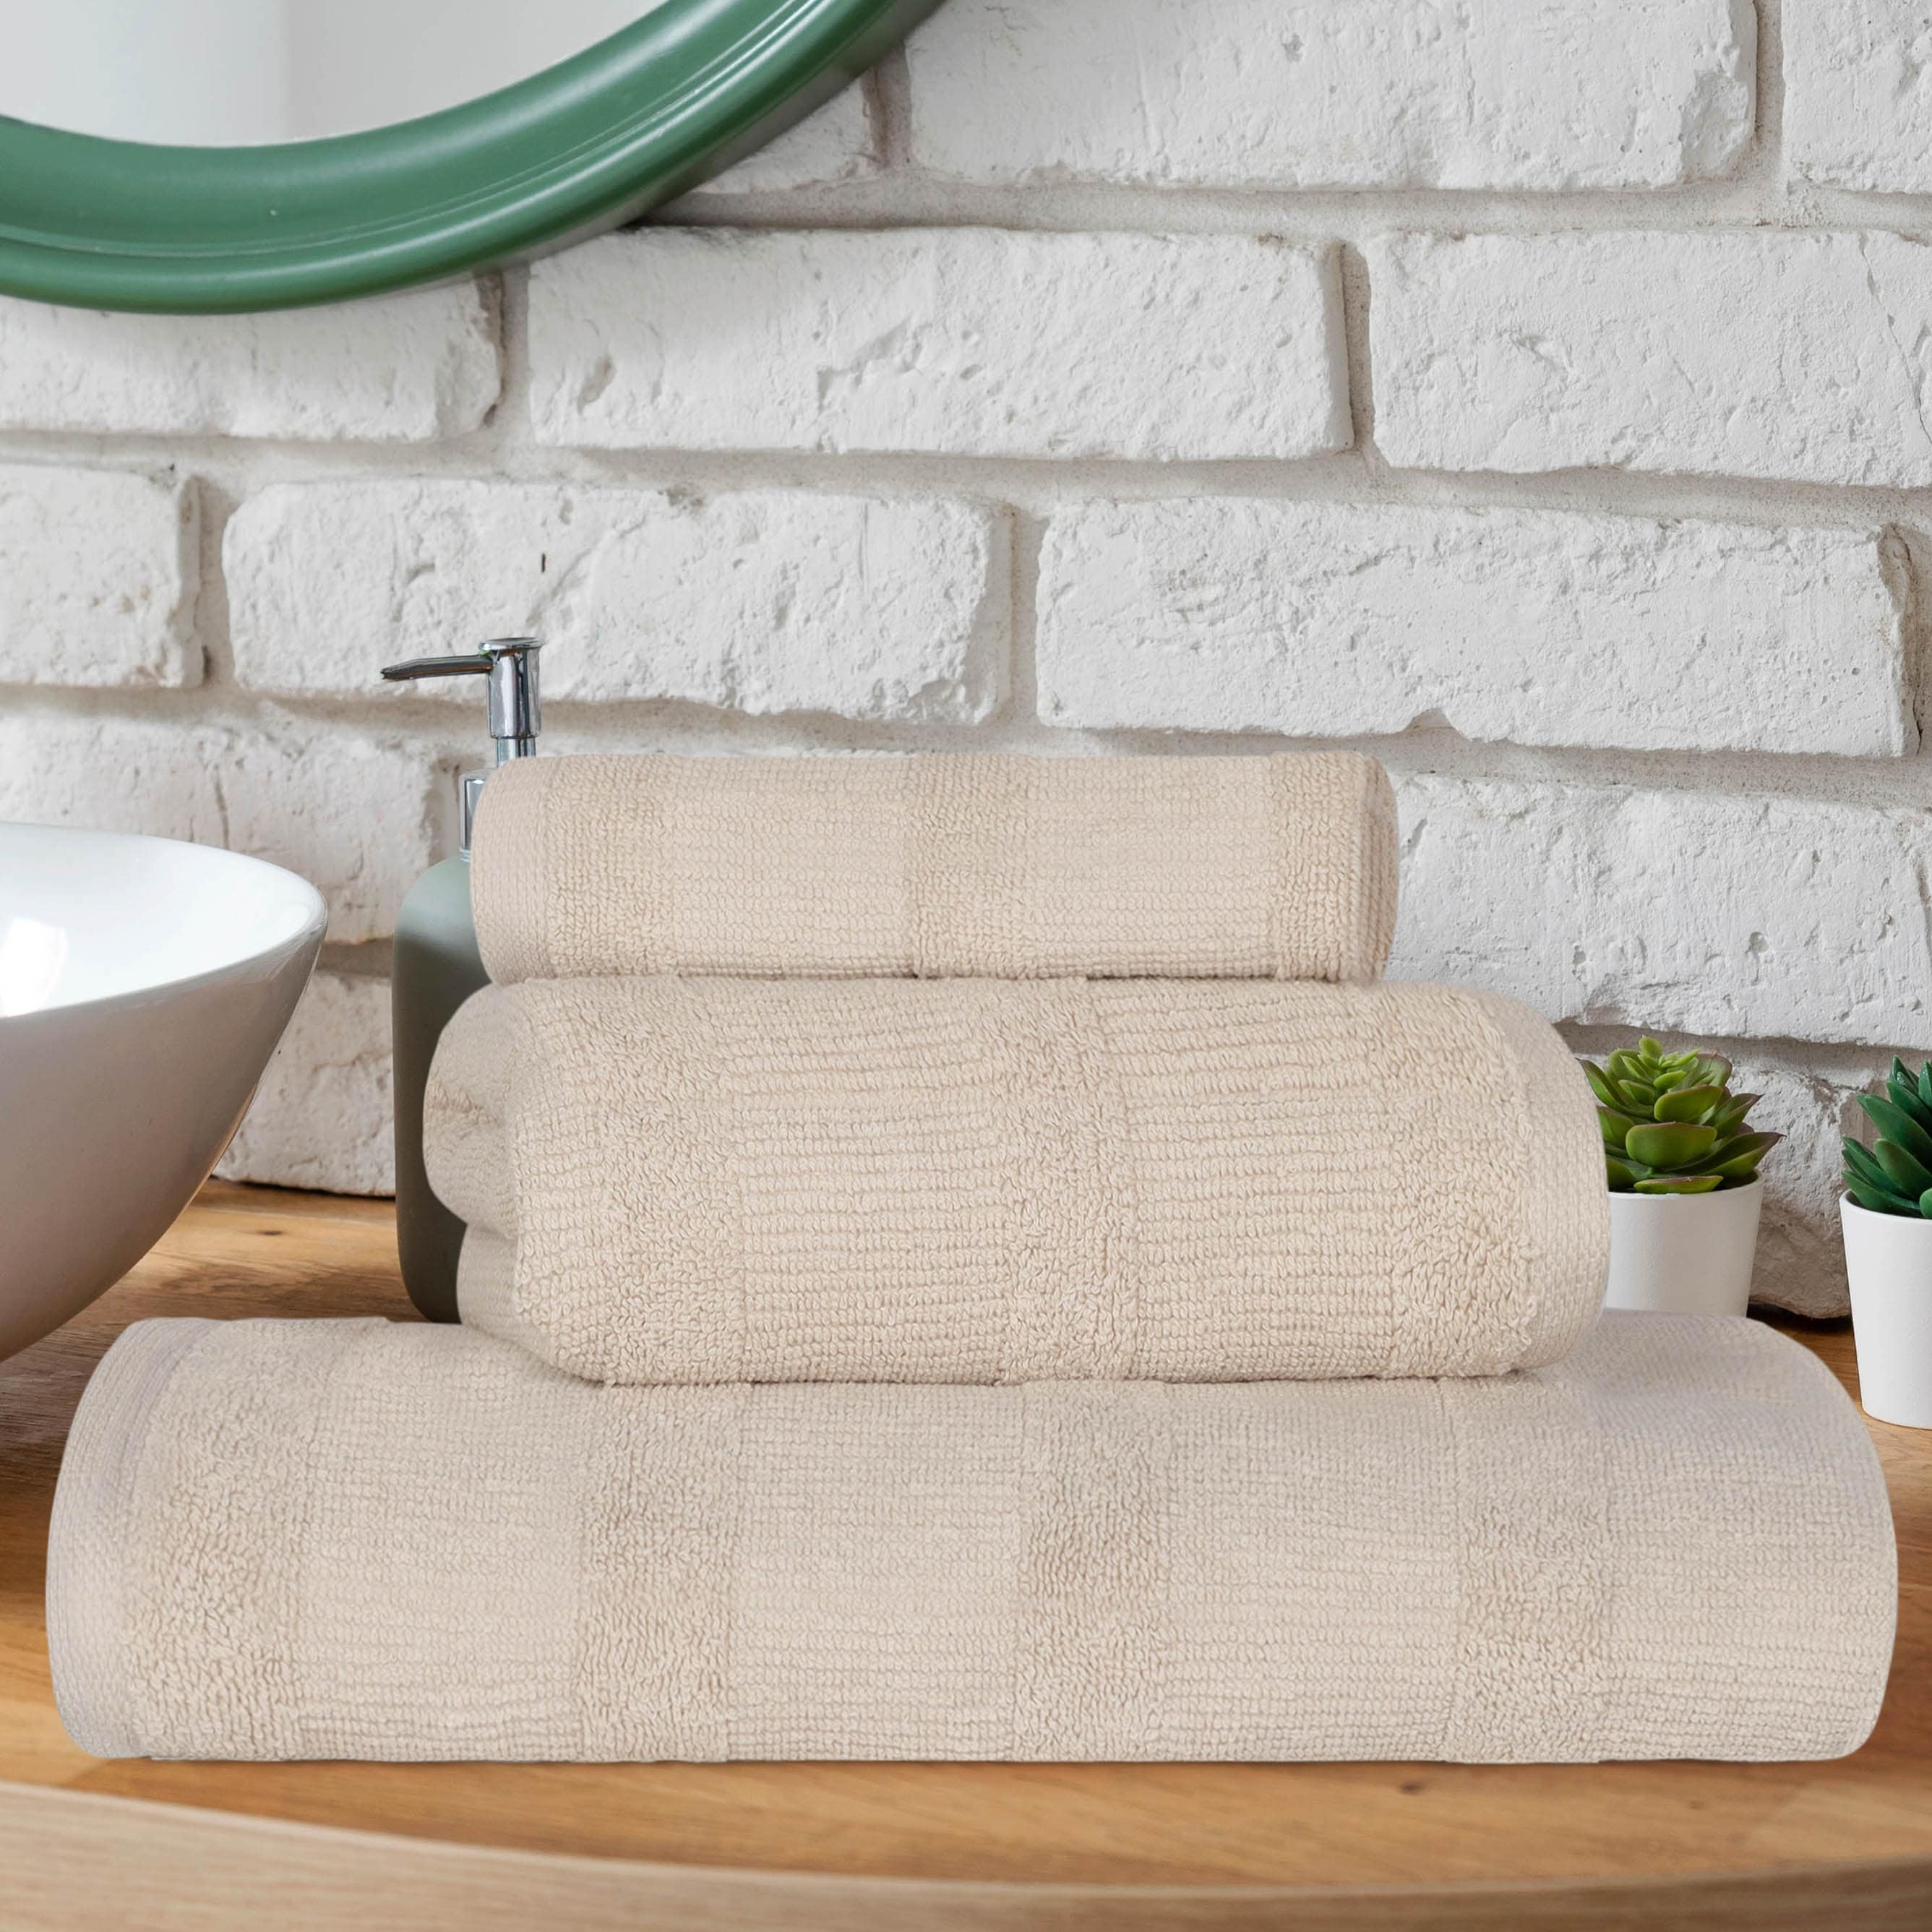 https://ak1.ostkcdn.com/images/products/is/images/direct/439ee4144d5d92bf2471eacec3bd88ef56b9a19c/Quick-Dry-Ribbed-Turkish-Cotton-3-Piece-Bath-Towel-Set-by-Superior.jpg